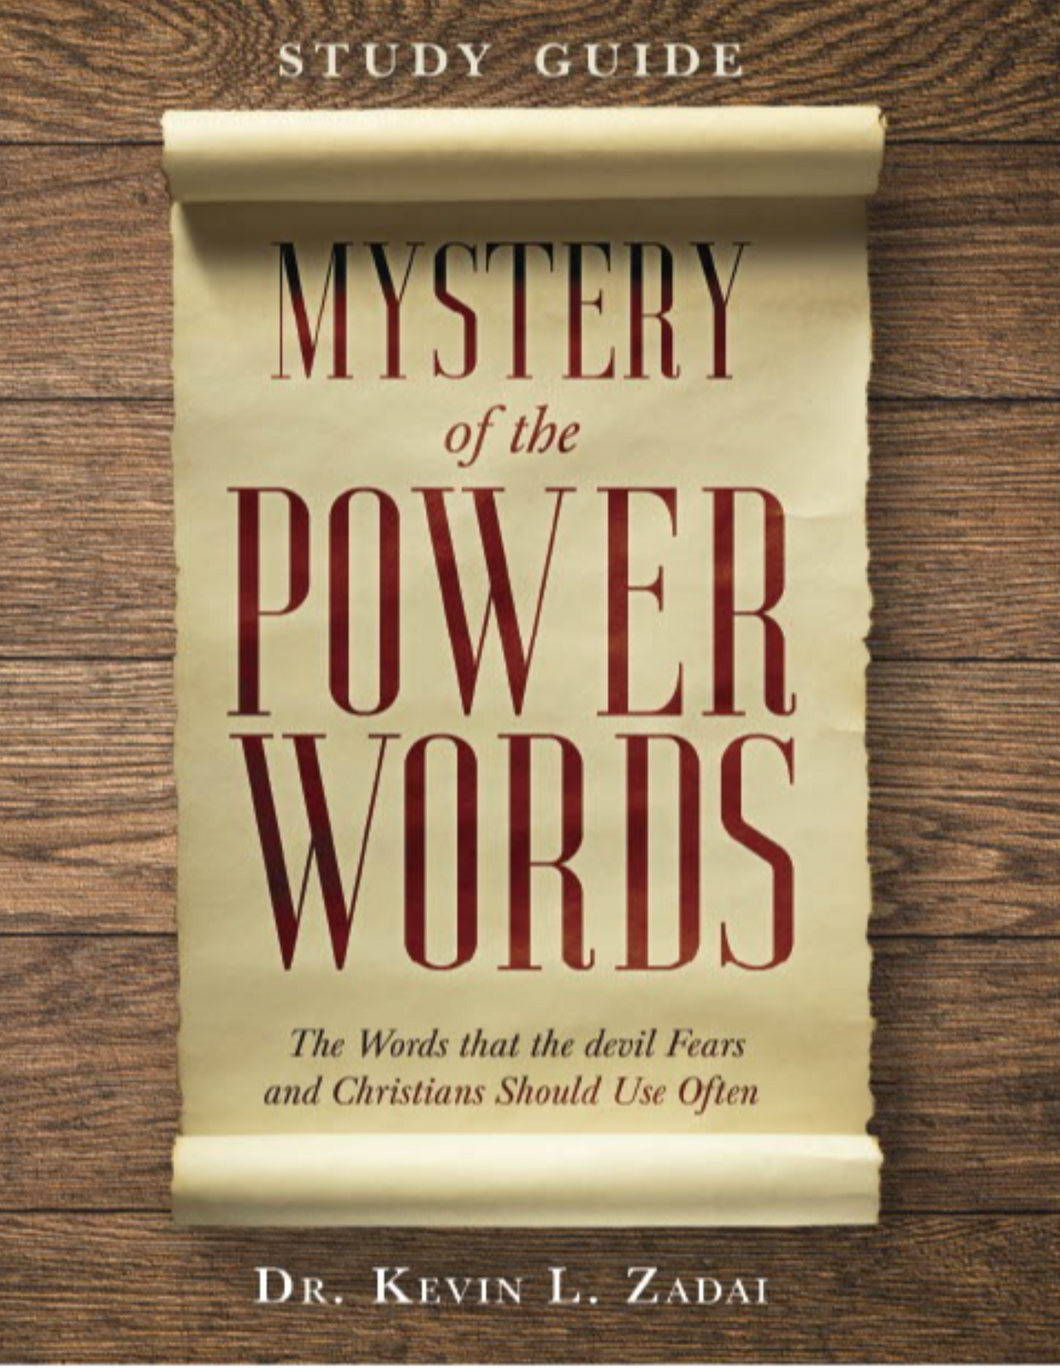 Mystery Of The Power Words: The Words that the devil Fears and Christians Should Use Often- Study Guide